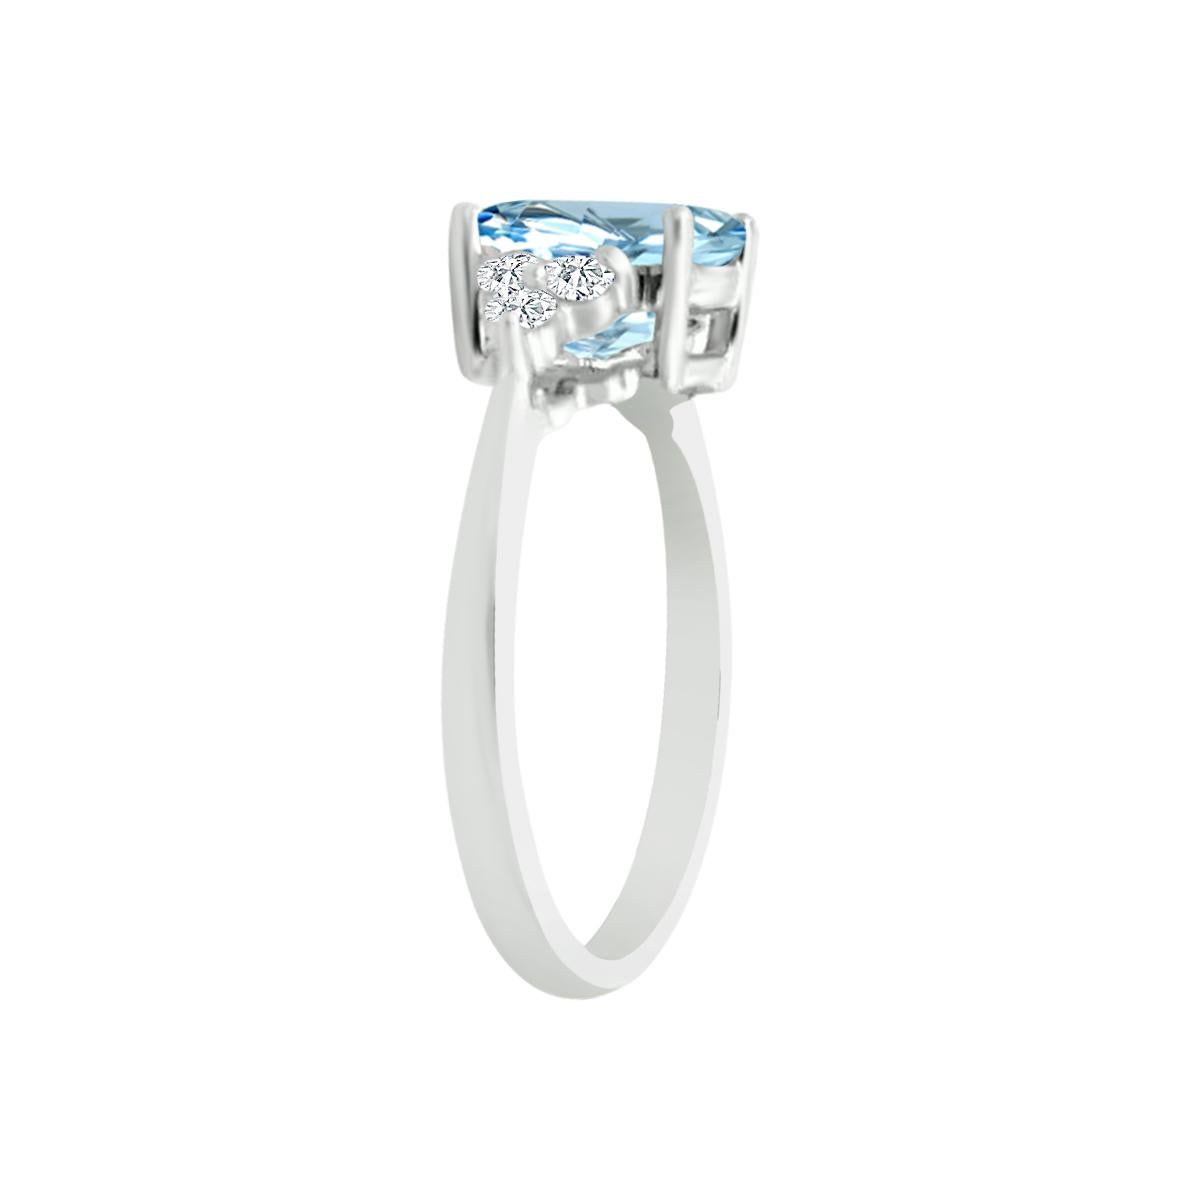 A Stunning Ring That Is Forever Timeless. Adore Your Future Bride With This Truly Glamorous Aquamarine Diamond Ring.
This Ring Is Made In 14k White Gold and Features A Big Oval 7X5mm Aquamarine Gemstone With White Diamonds Surrounded on Either Side